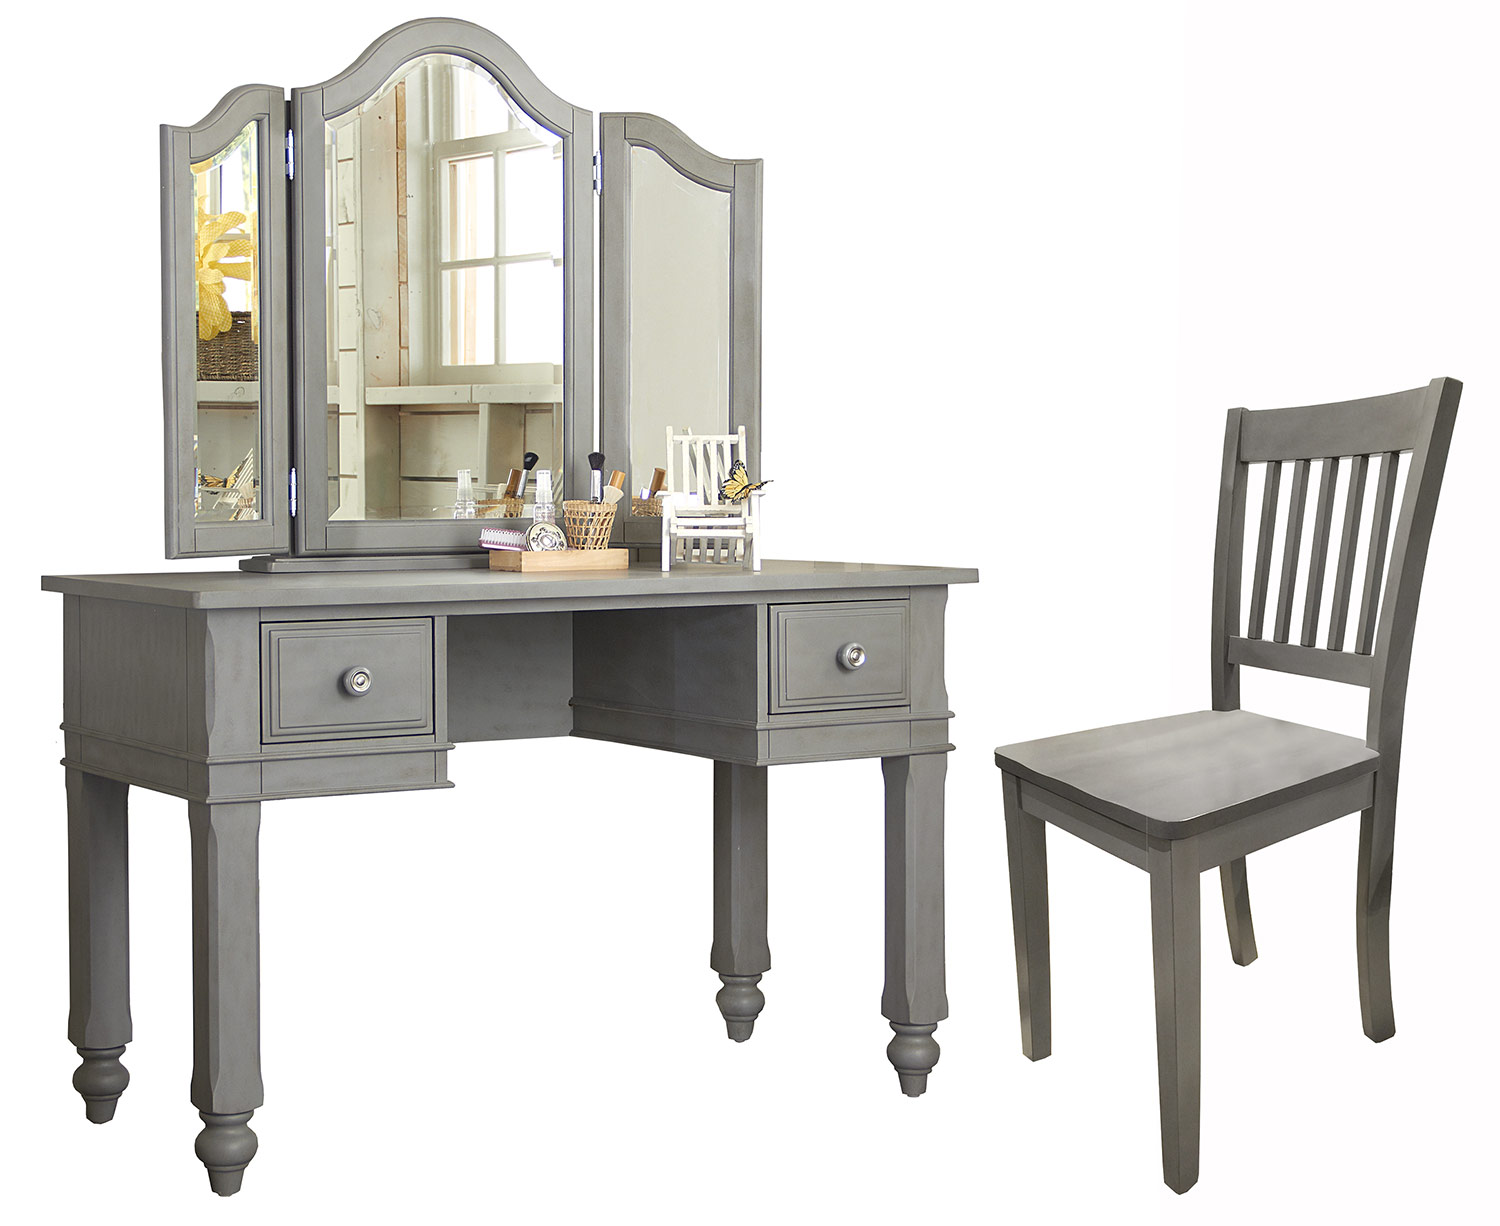 NE Kids Lake House Writing Desk with Vanity Mirror and Chair - Stone